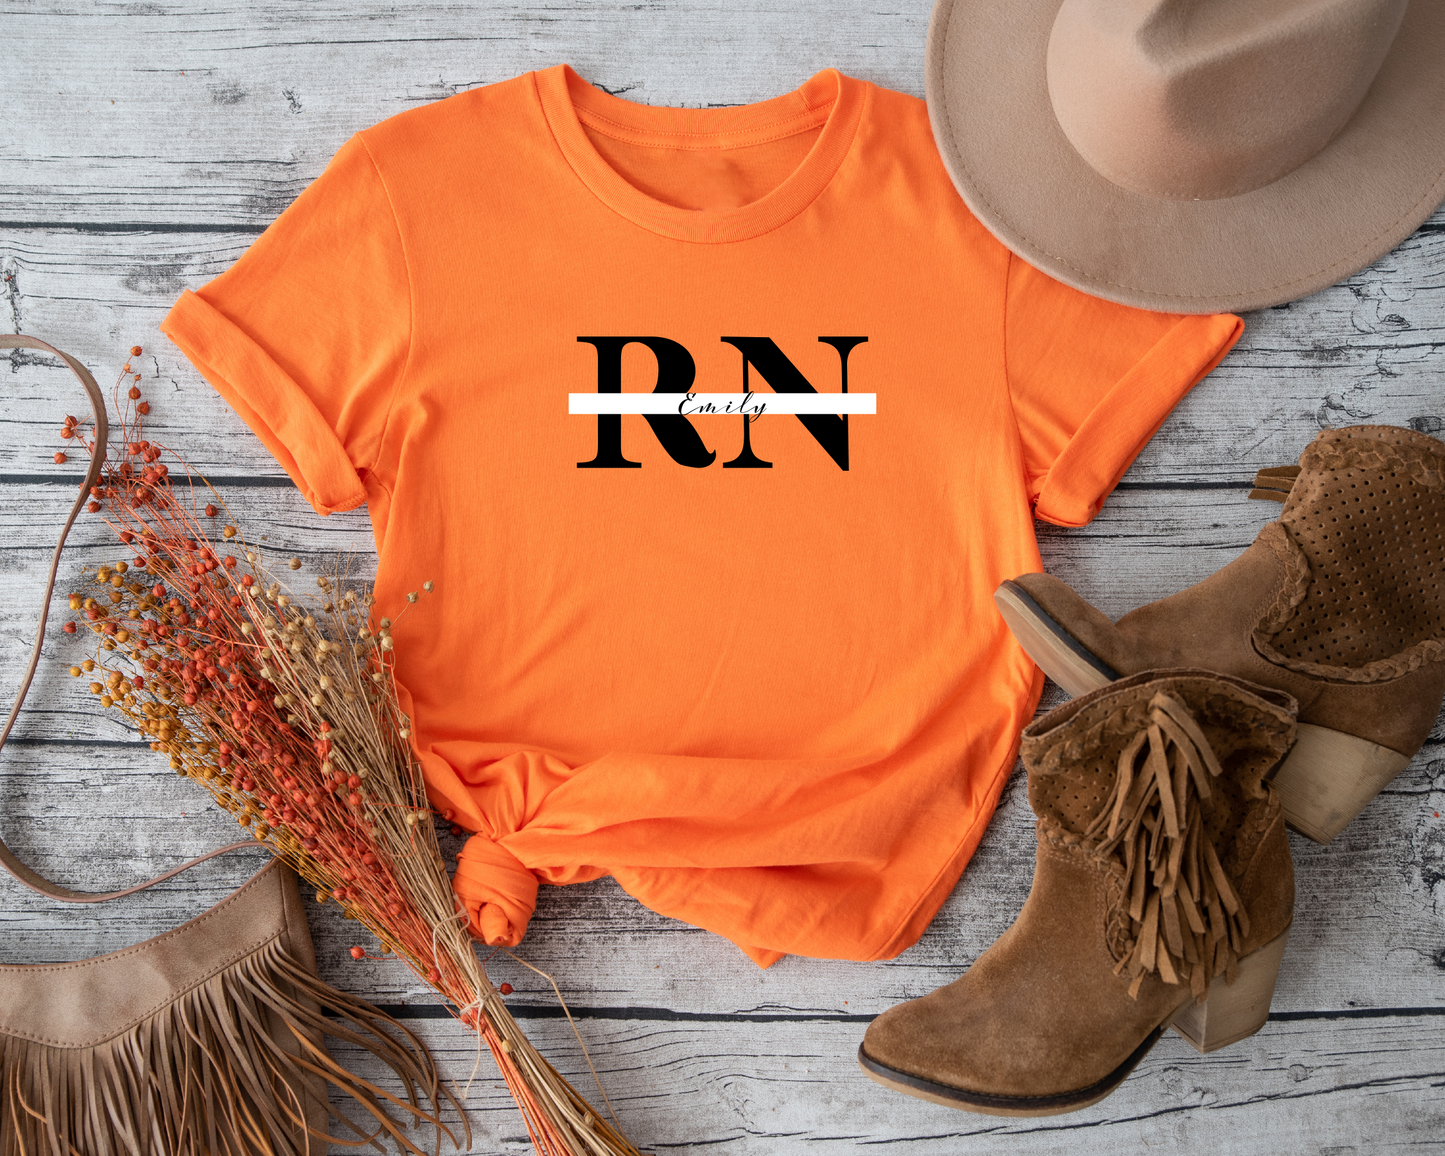 Celebrate the Dedication of Registered Nurses with Personalized RN Nurse Shirts